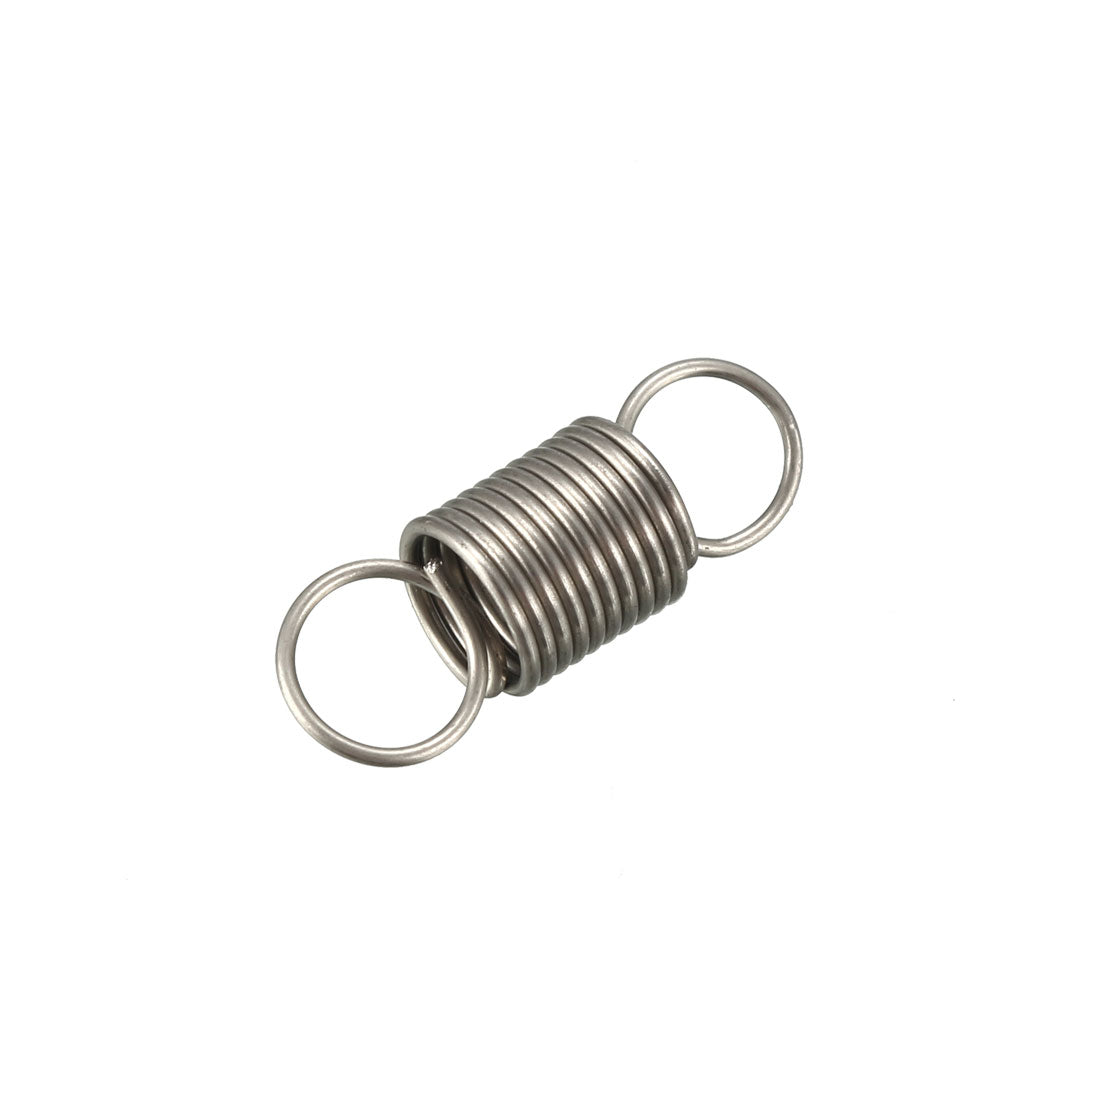 uxcell Uxcell Extended Tension Spring Wire Diameter 0.02", OD 0.2", Free Length 0.59" 5pcs